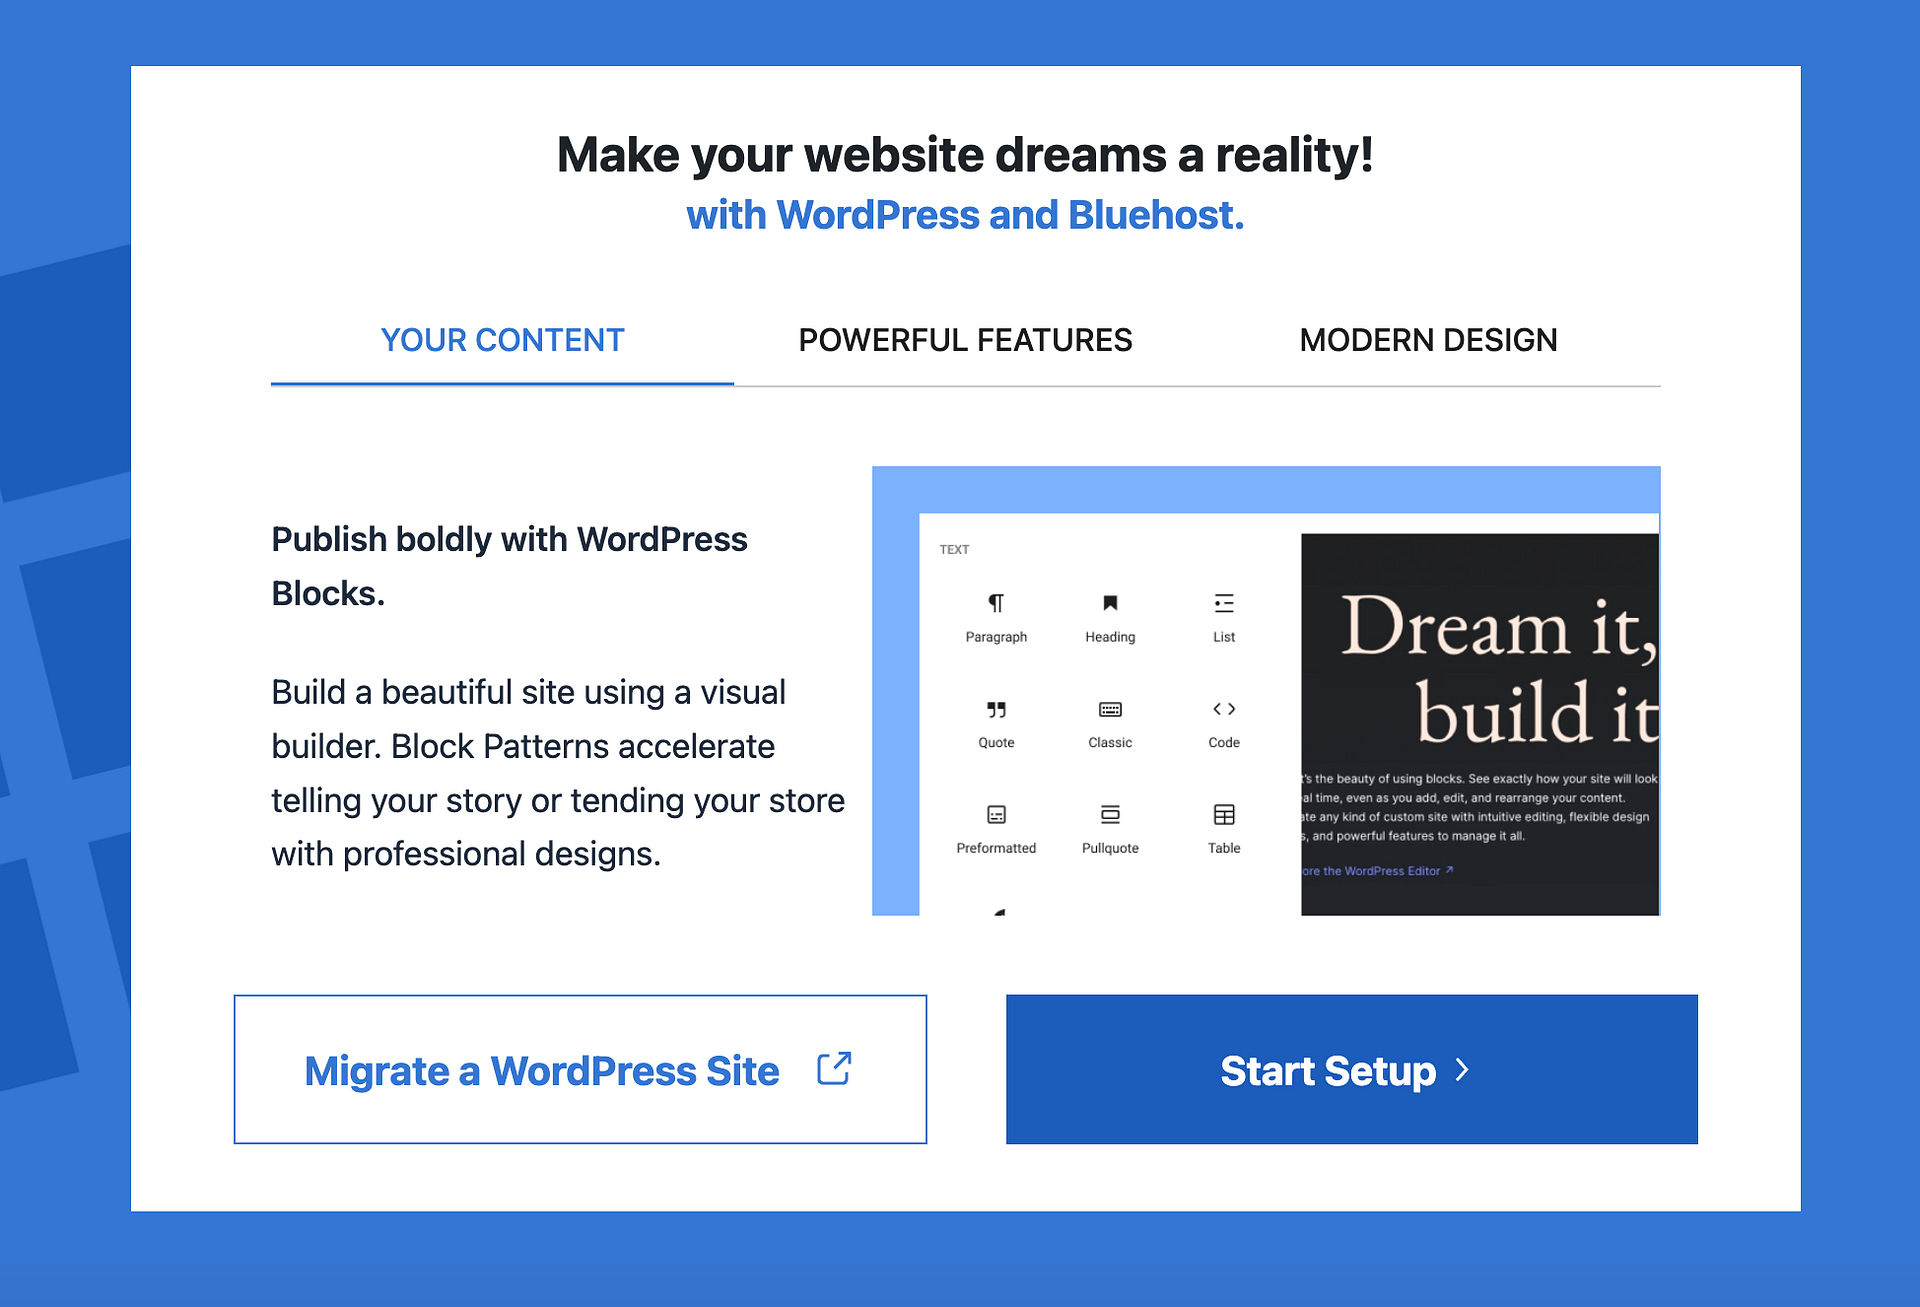 Use WordPress and Bluehost to start building your website. 